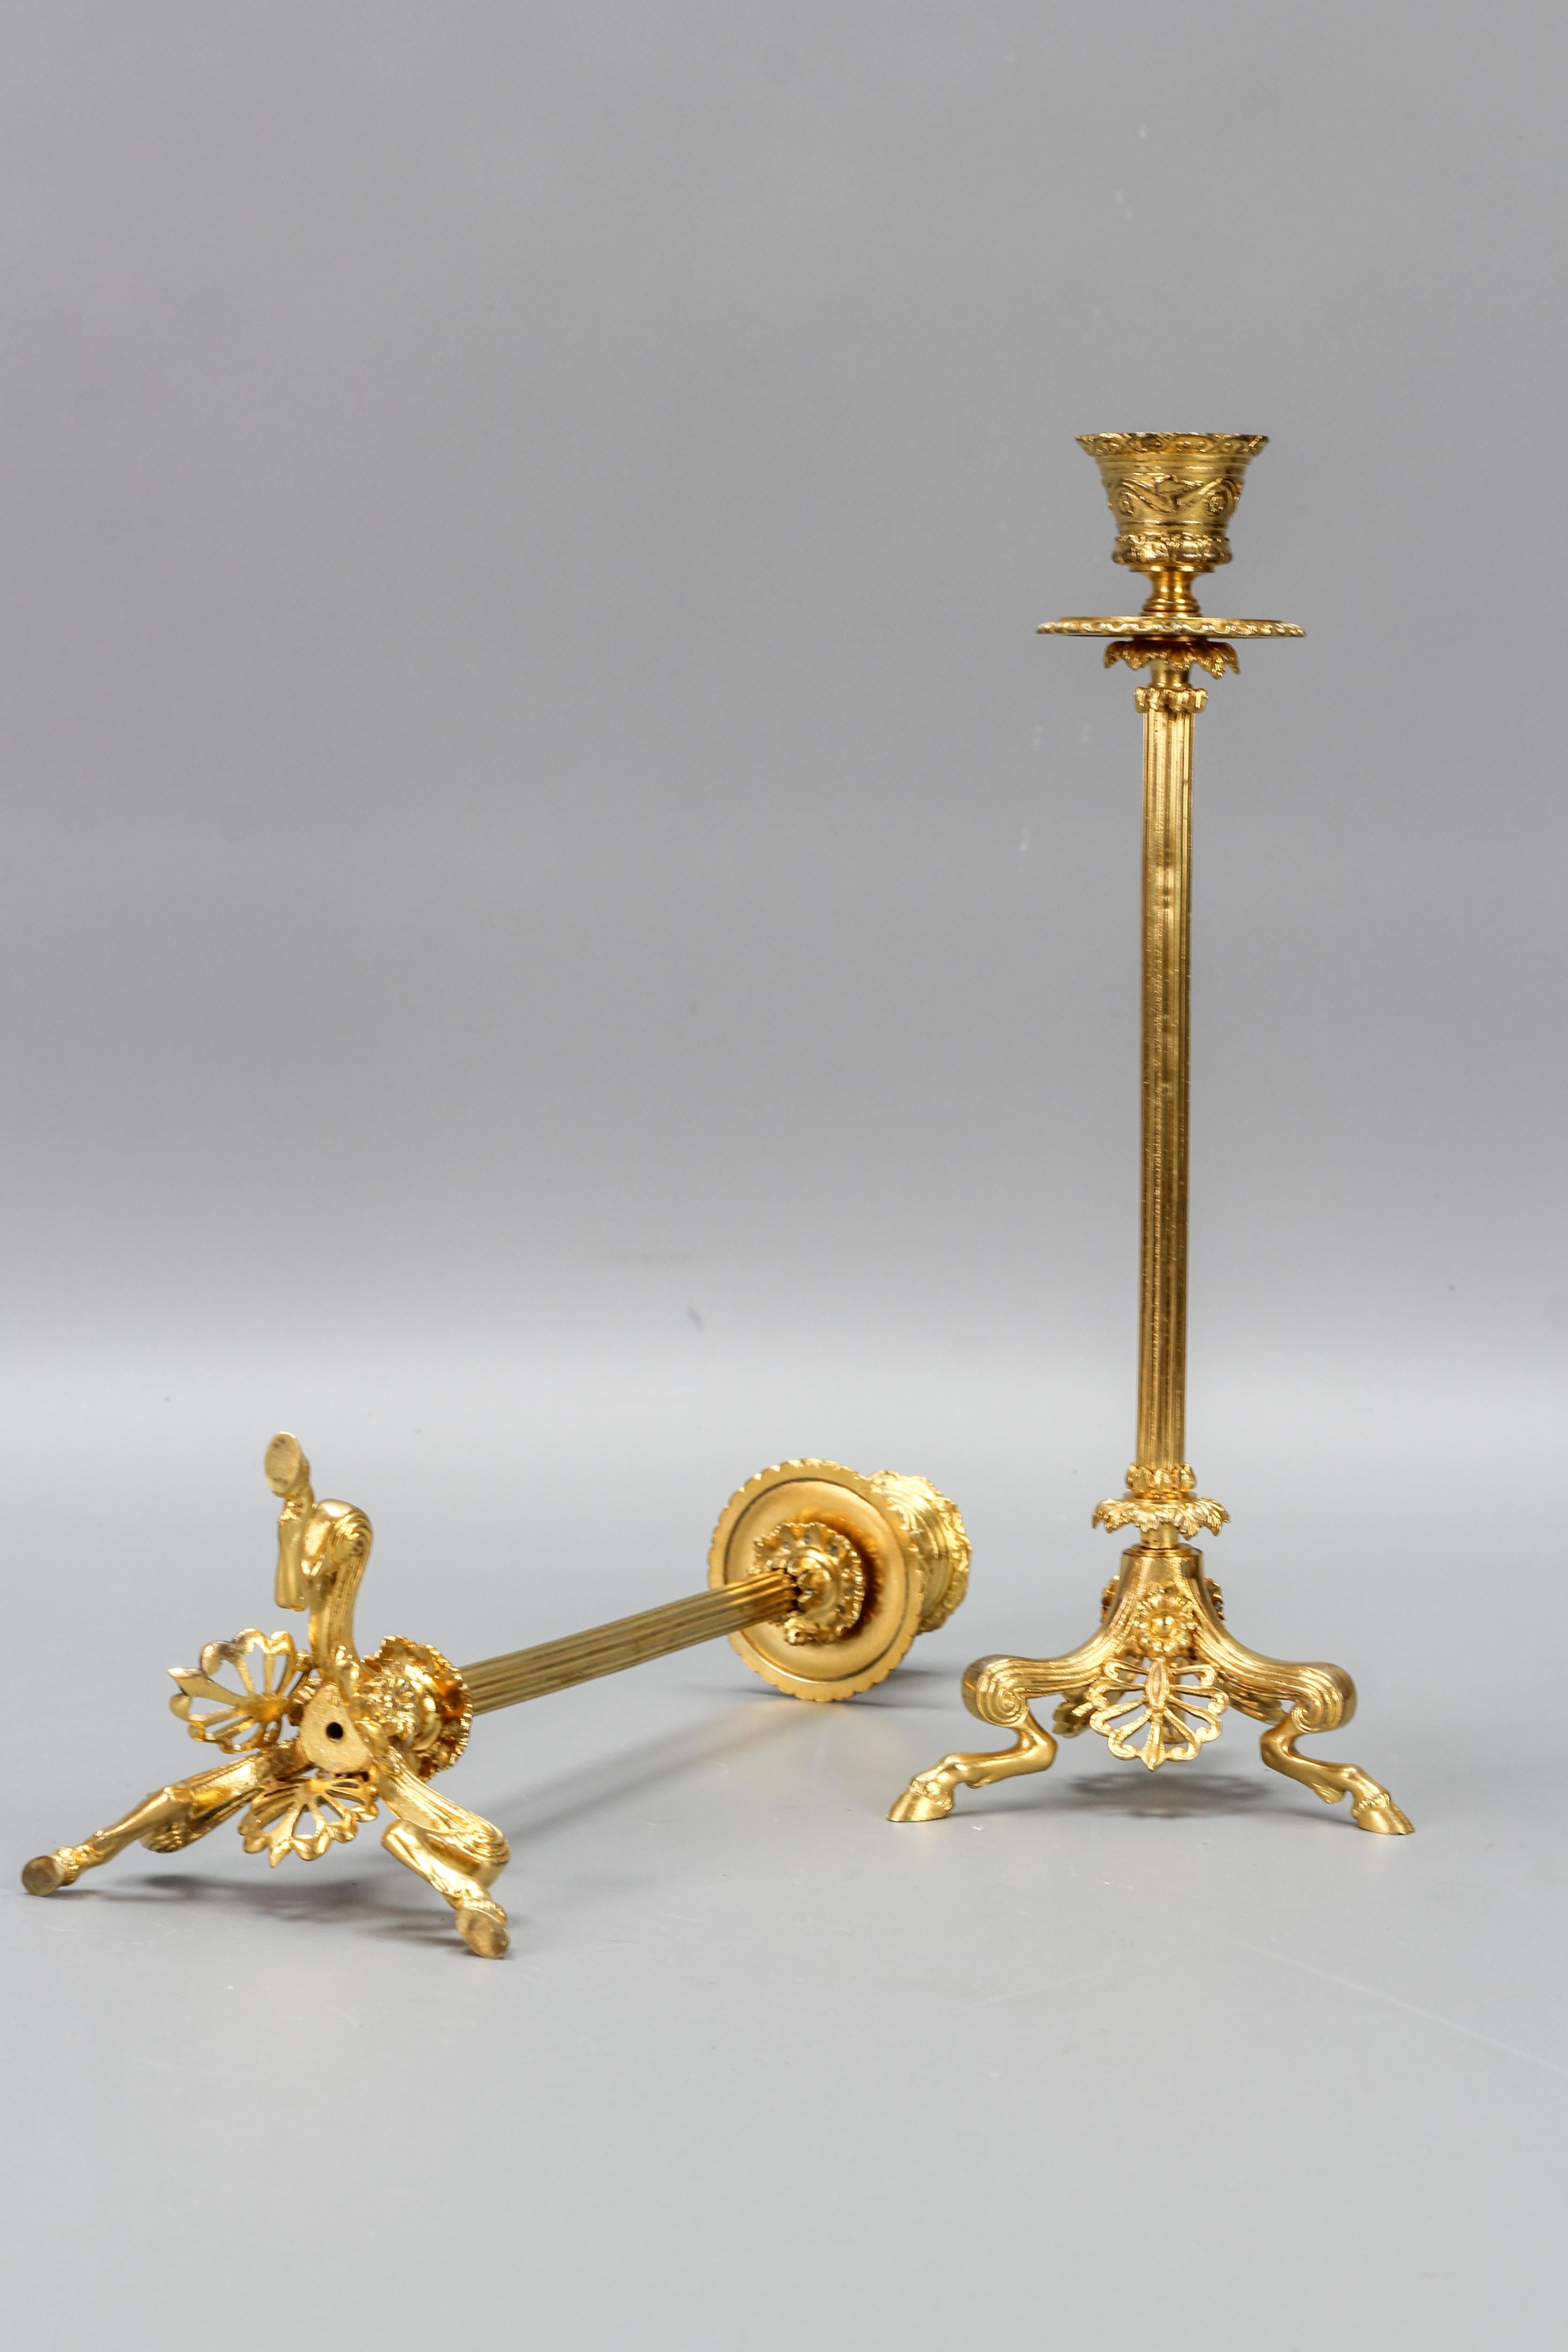 Pair of French Empire Style Gilt Bronze Candlesticks on Hoofed Faun Feet For Sale 10